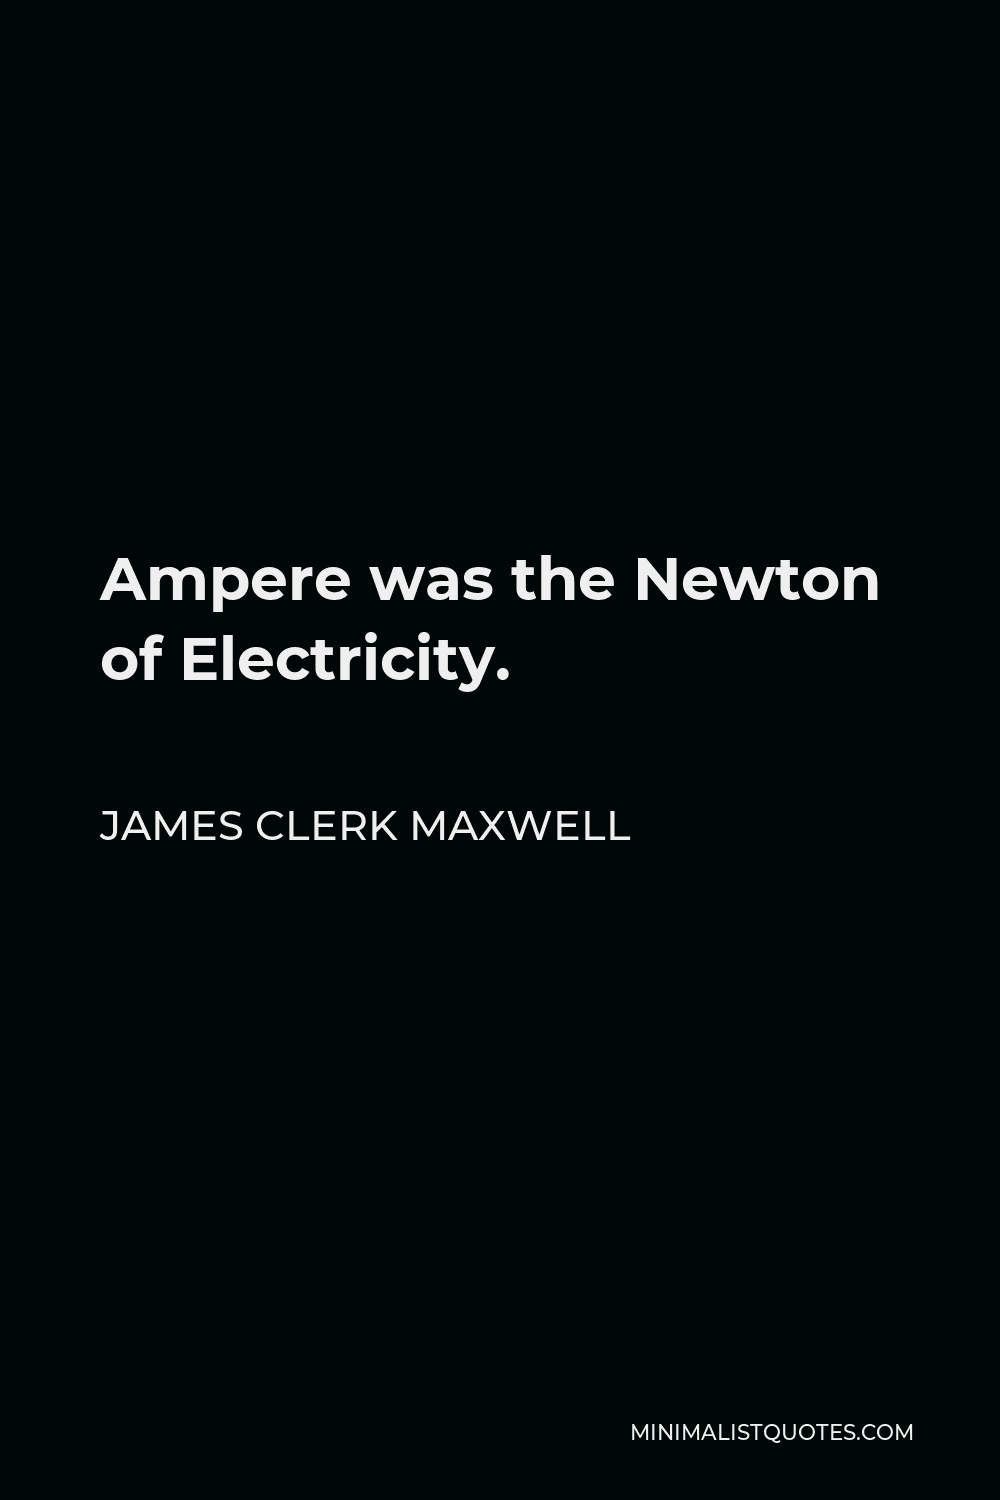 James Clerk Maxwell Quote - Ampere was the Newton of Electricity.